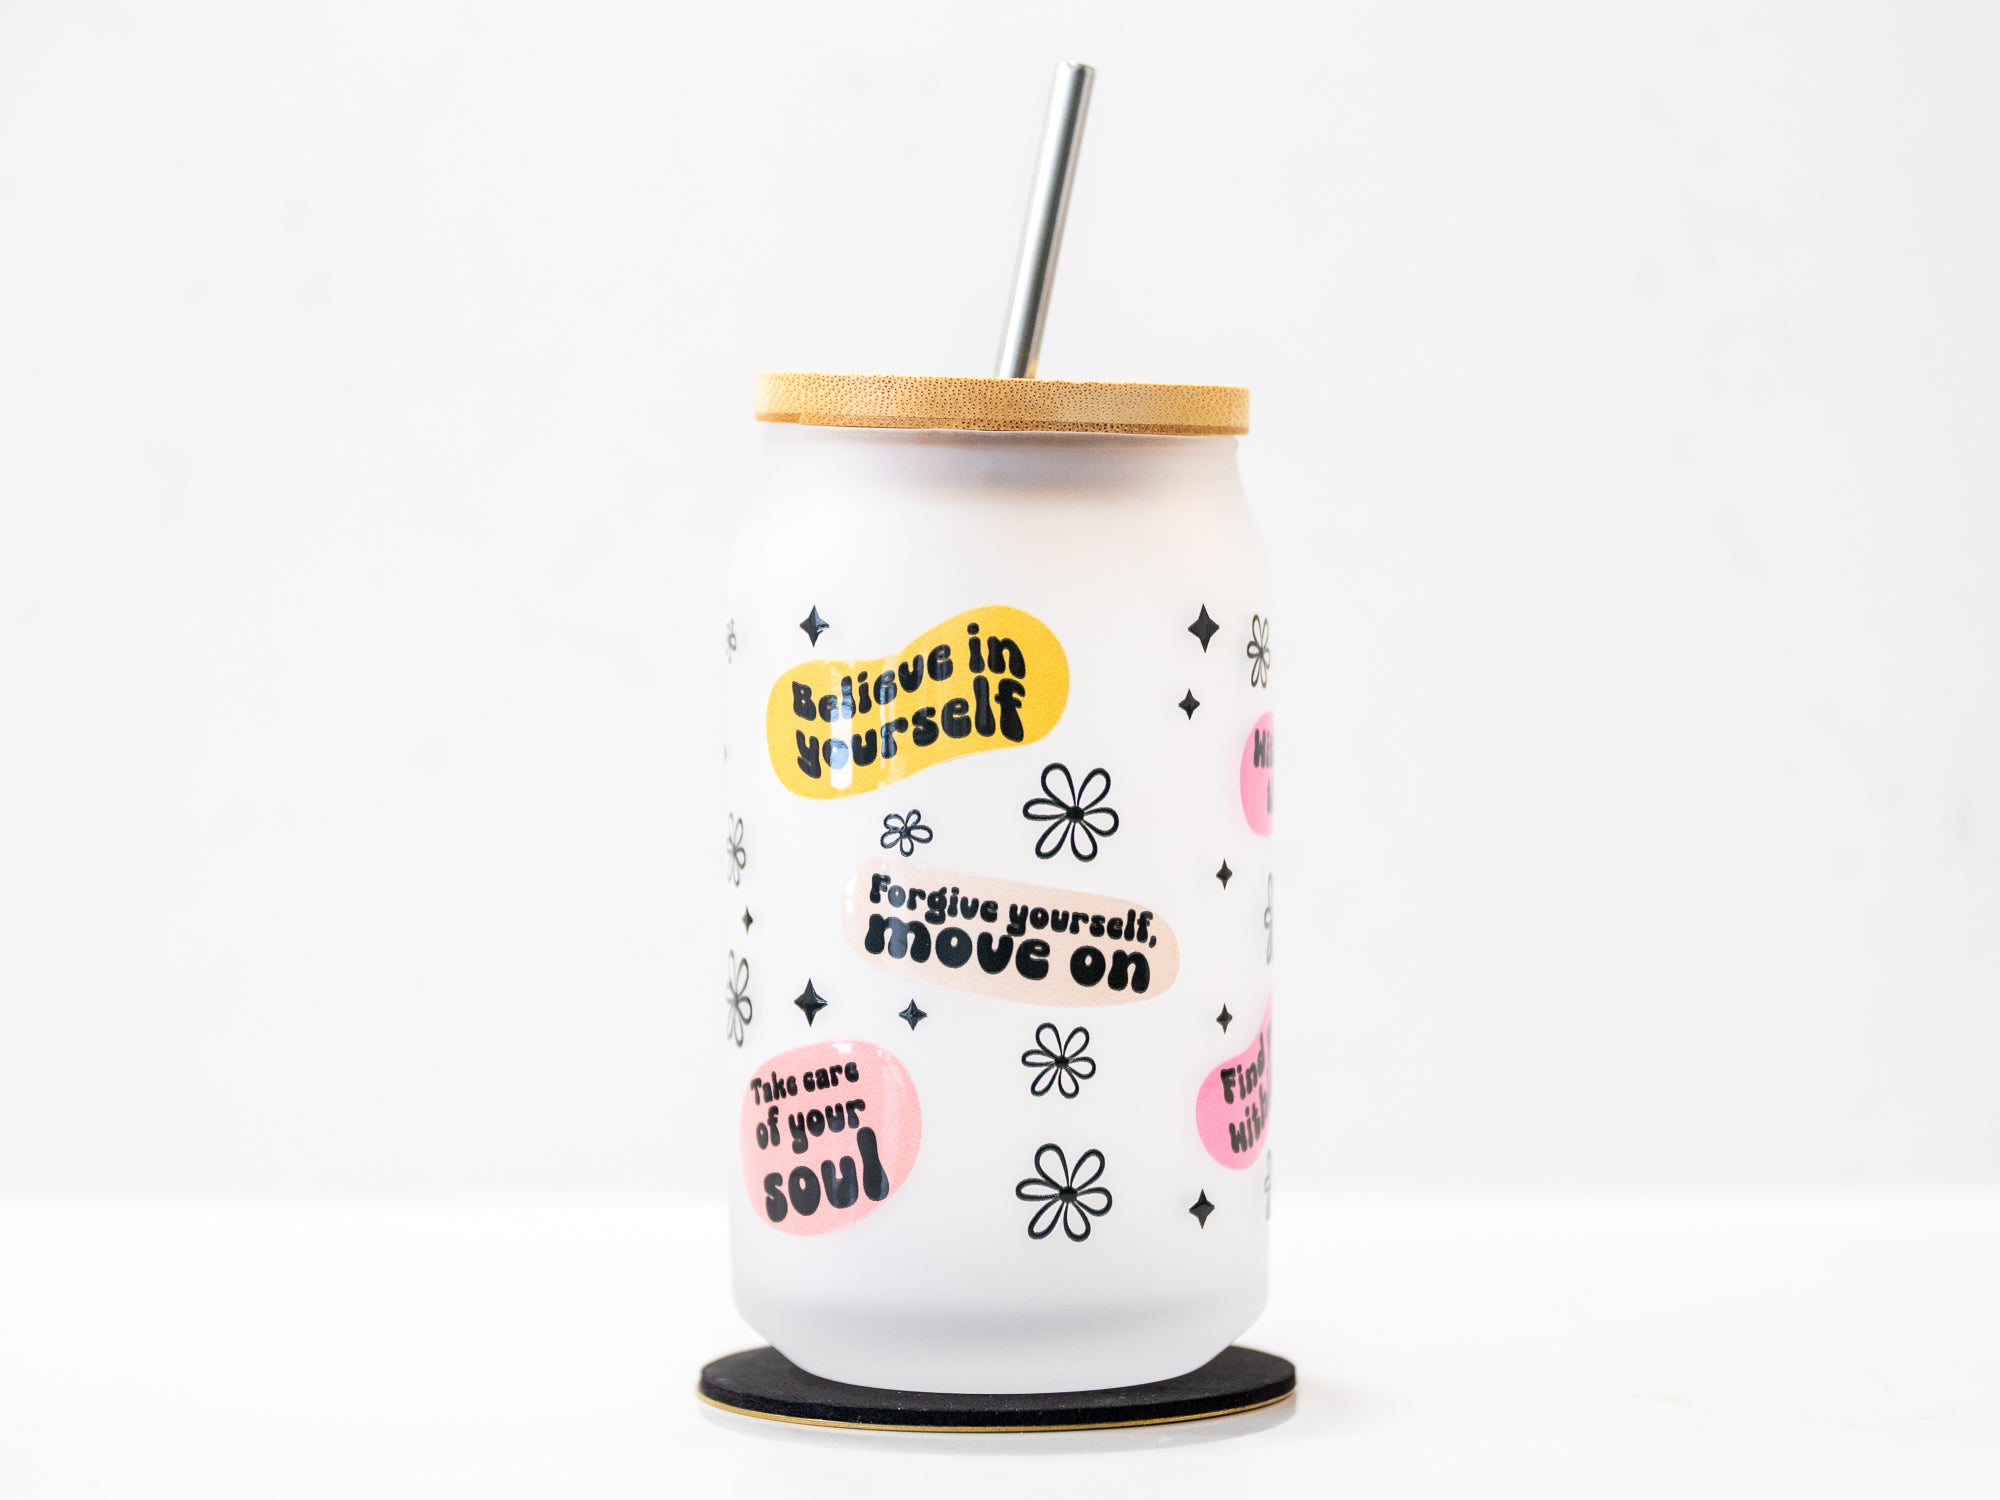 Believe in yourself - Frosted mason jar